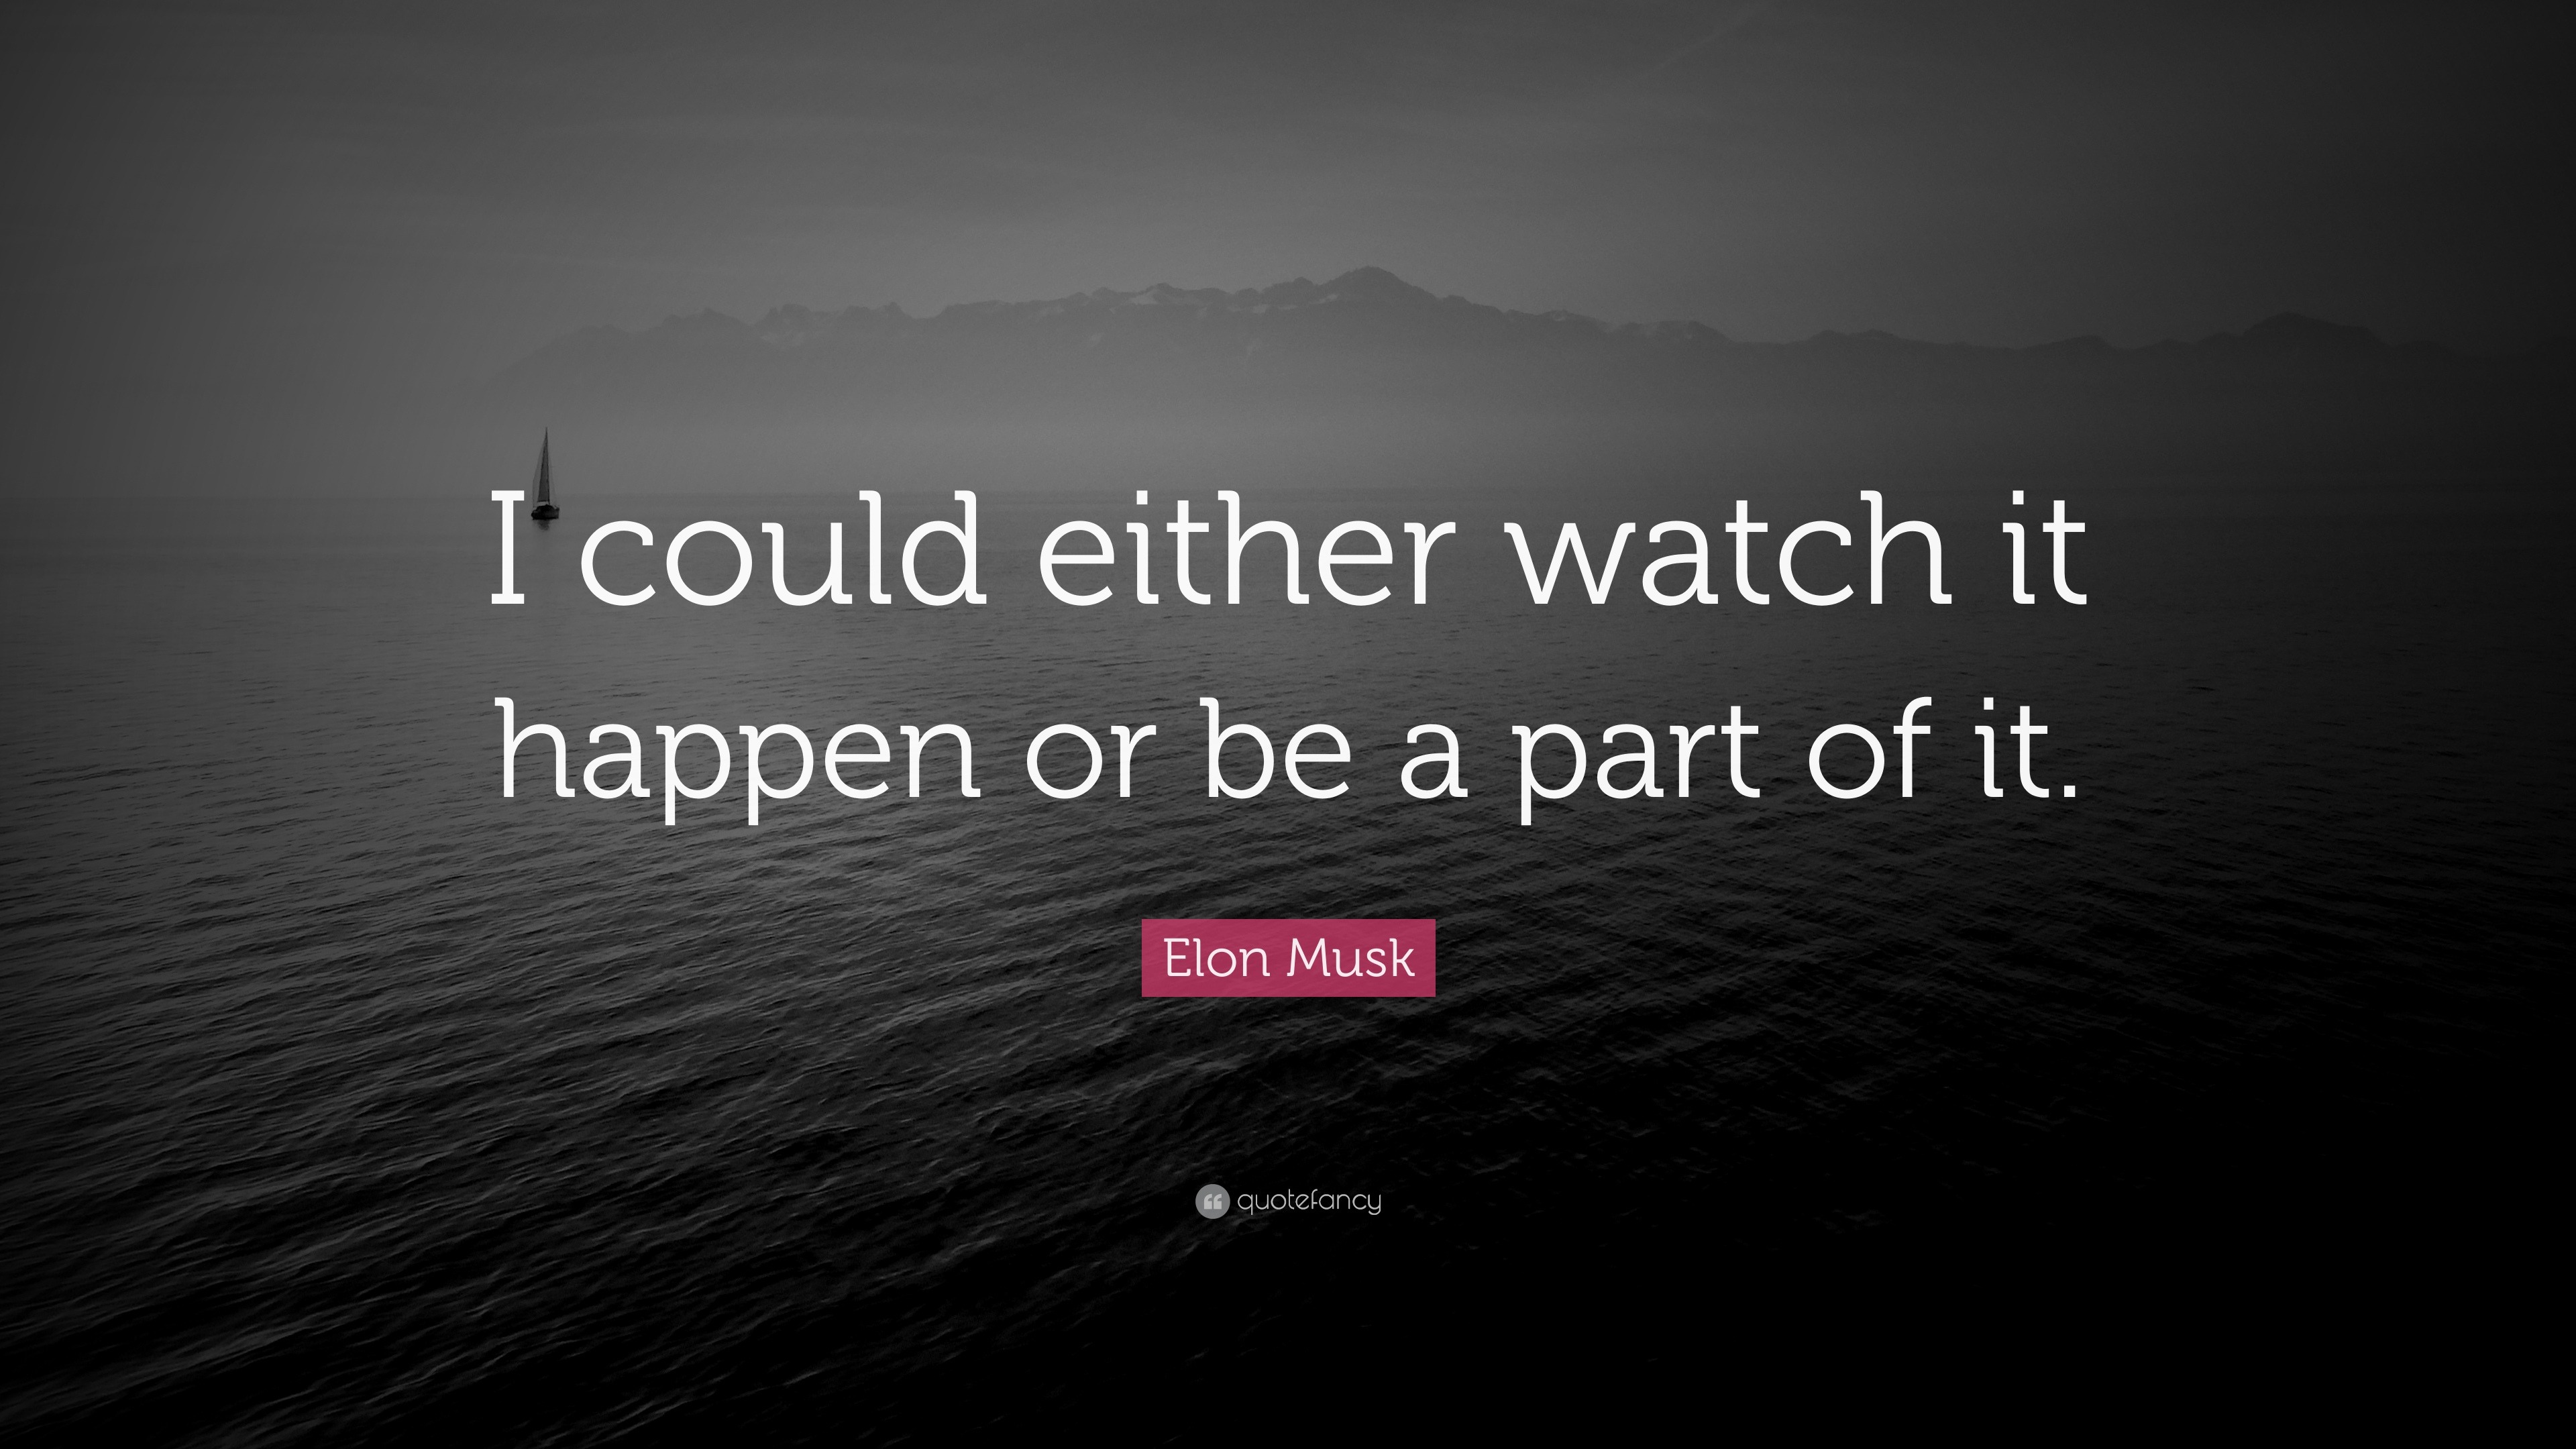 Elon Musk Quote: “I could either watch it happen or be a part of it